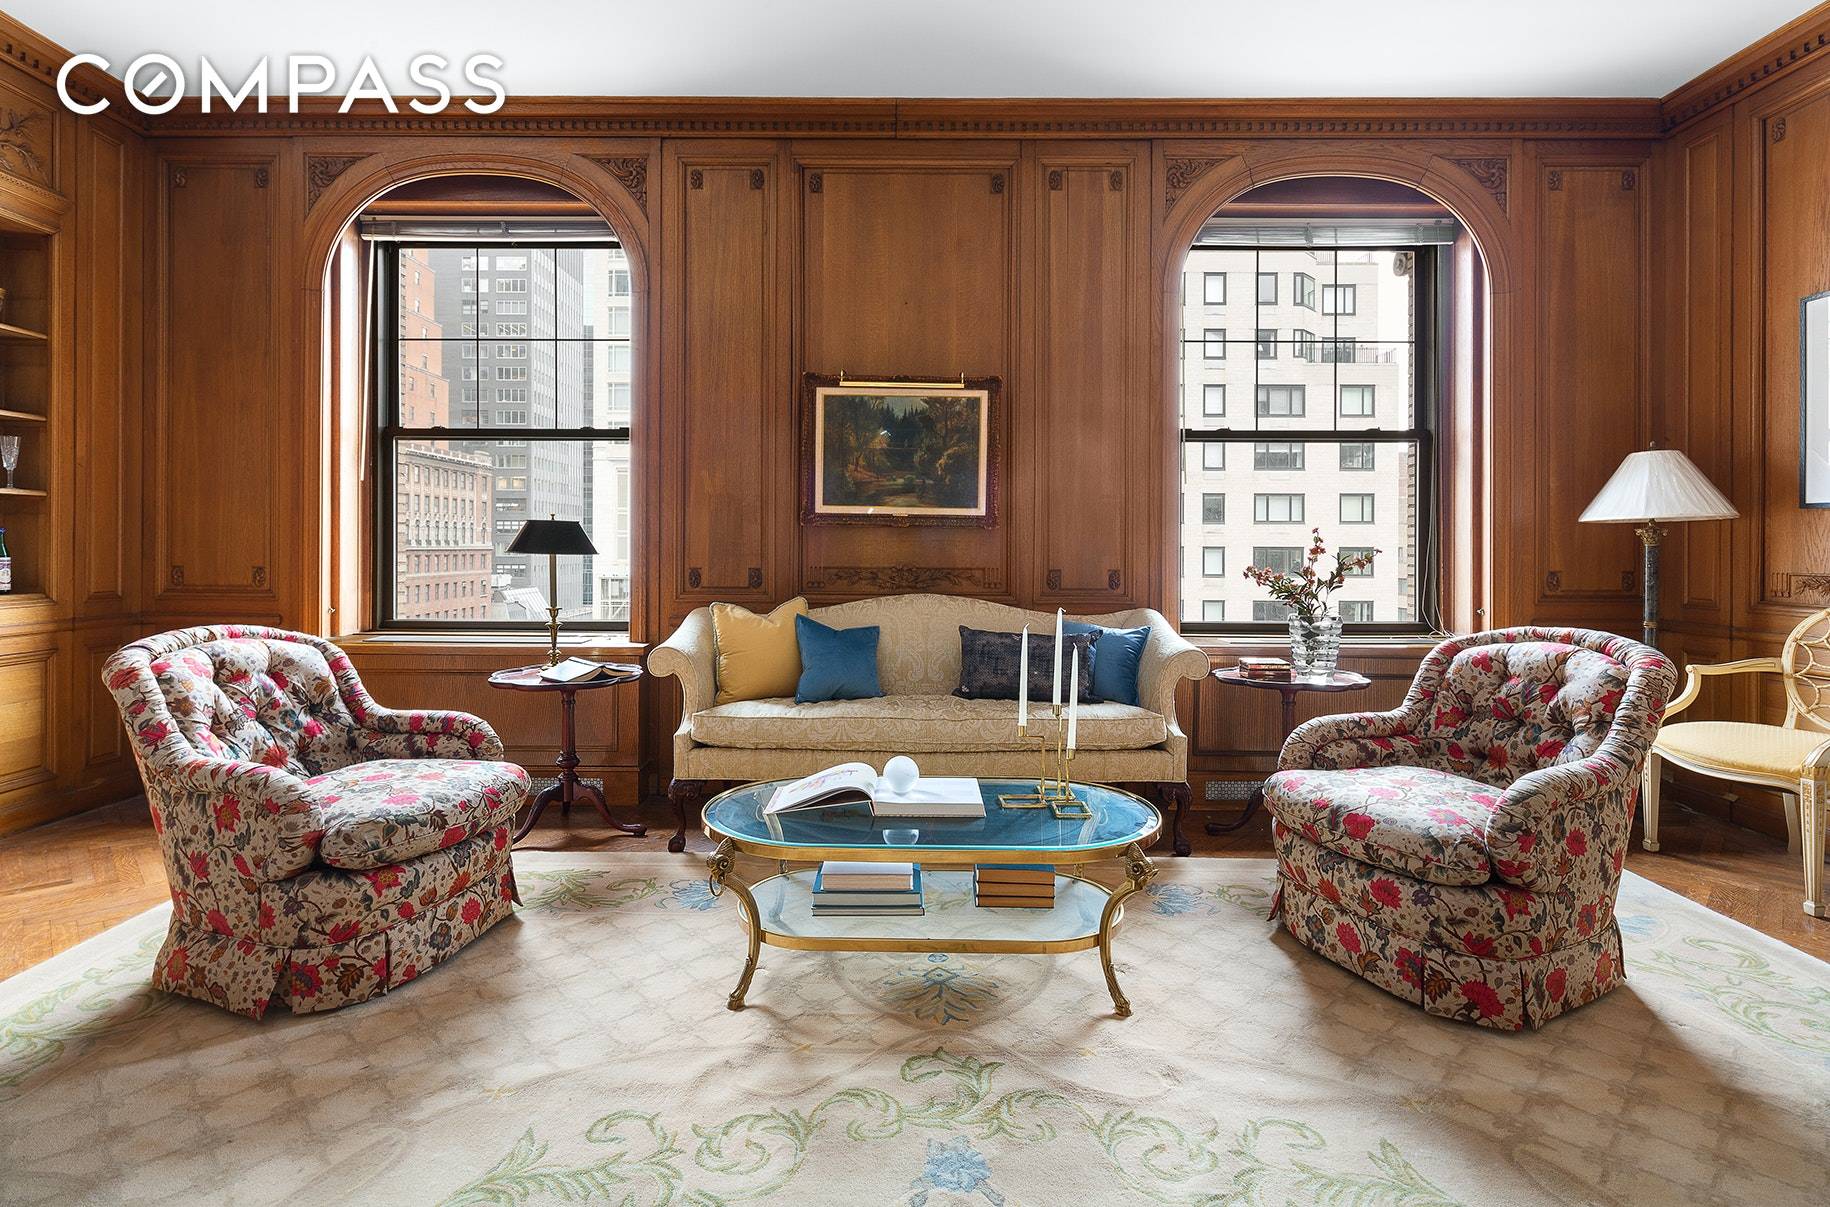 A unique and rarely available opportunity to own this grand prewar condominium on Park Avenue.